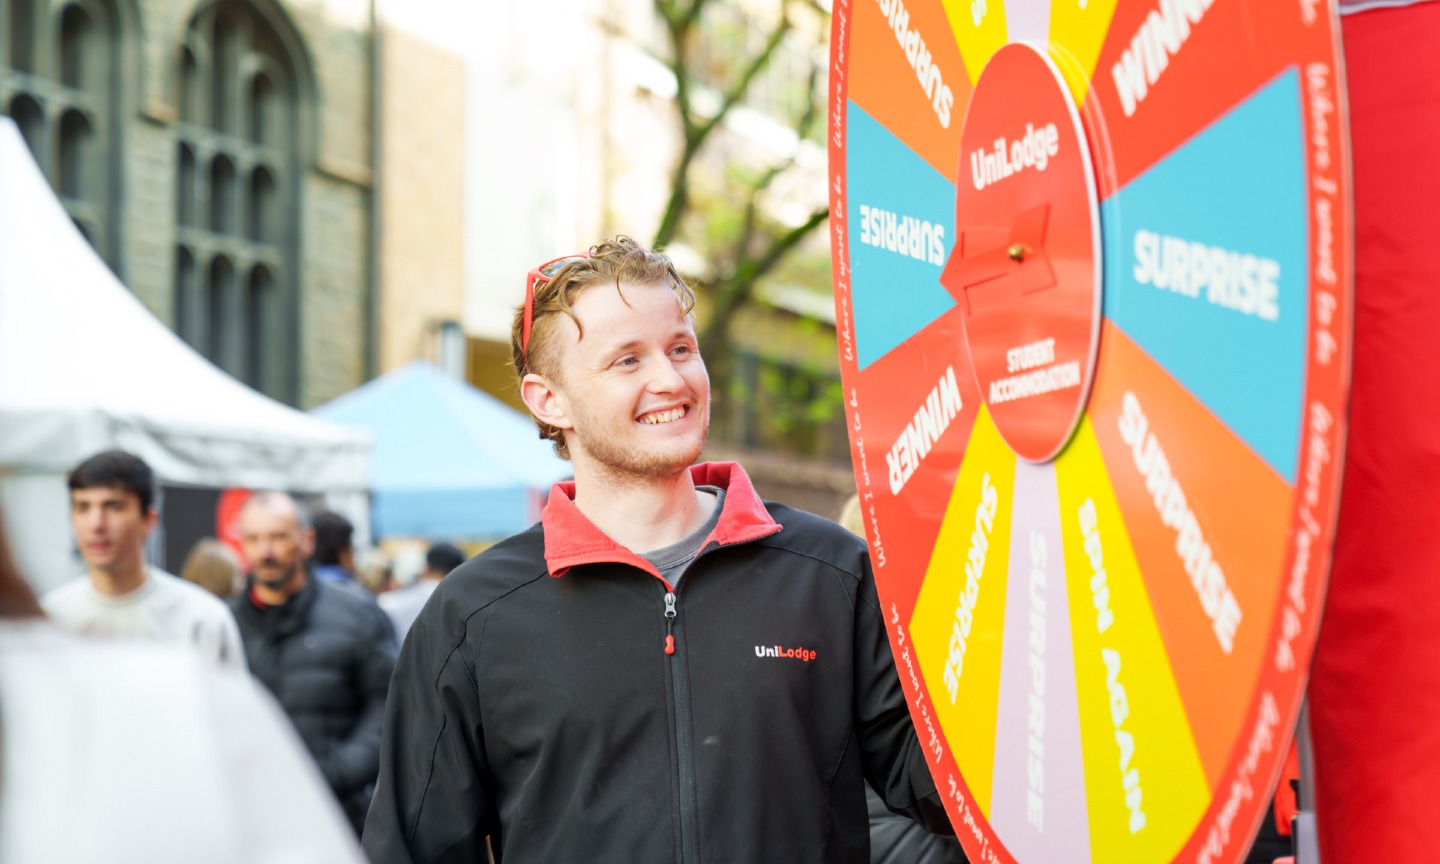 A prize wheel at the RMIT Open Day on the City campus